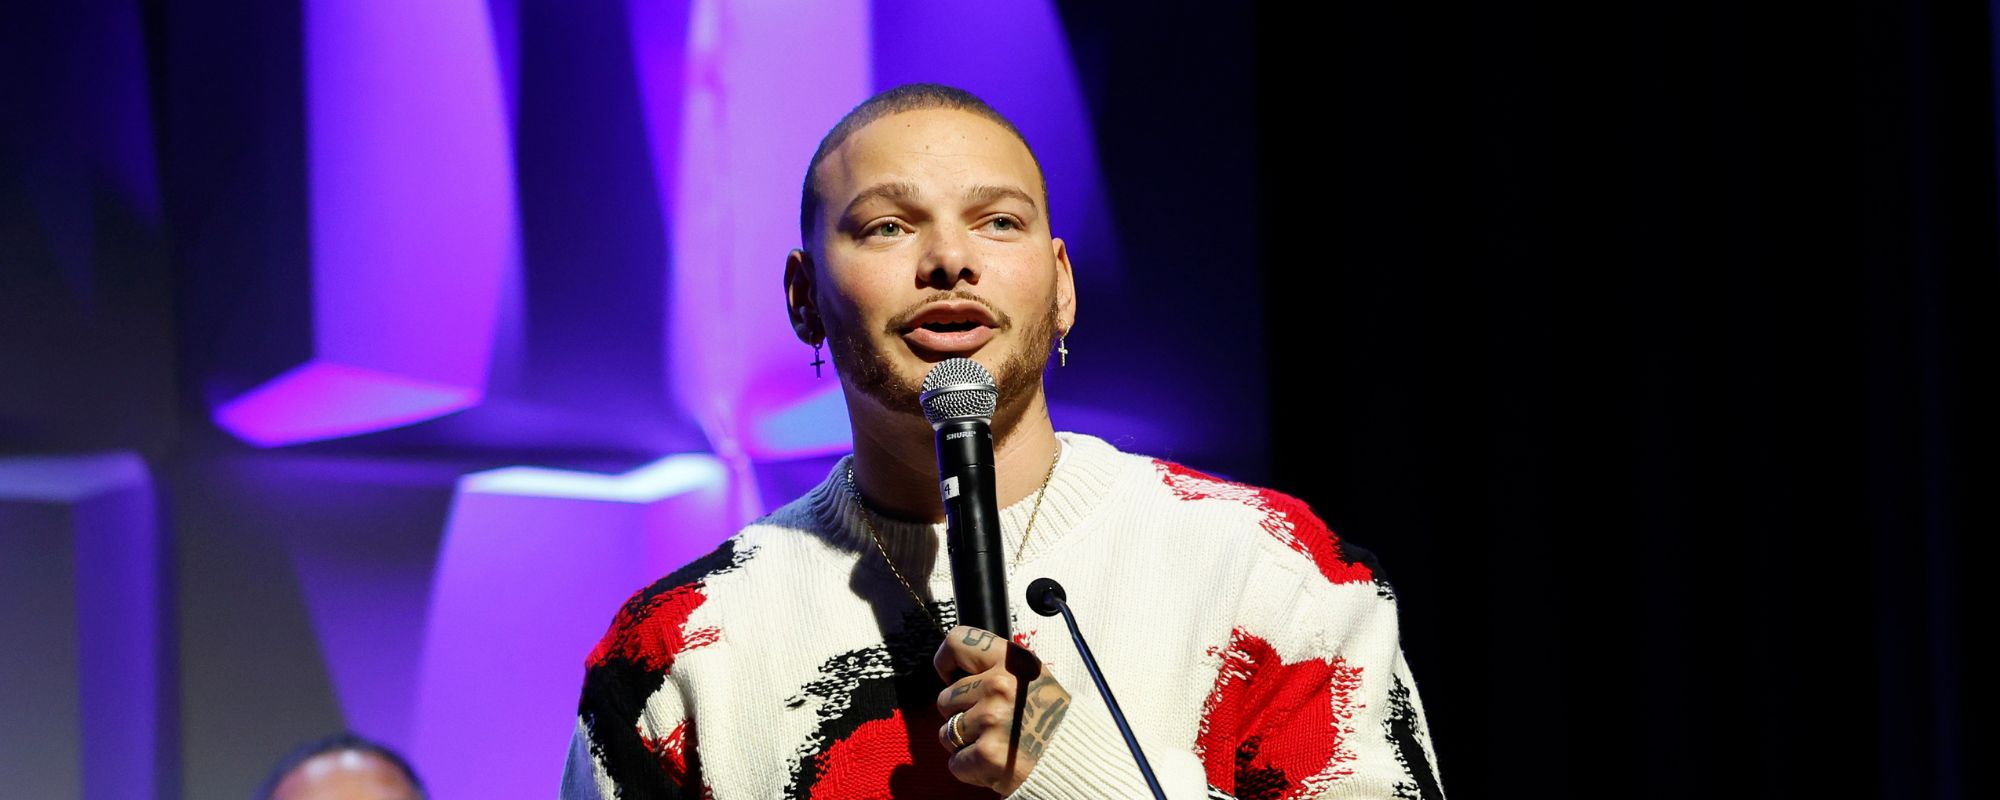 Country Star Kane Brown Is Headed to Disney World to Mentor the ‘American Idol’ Top 5